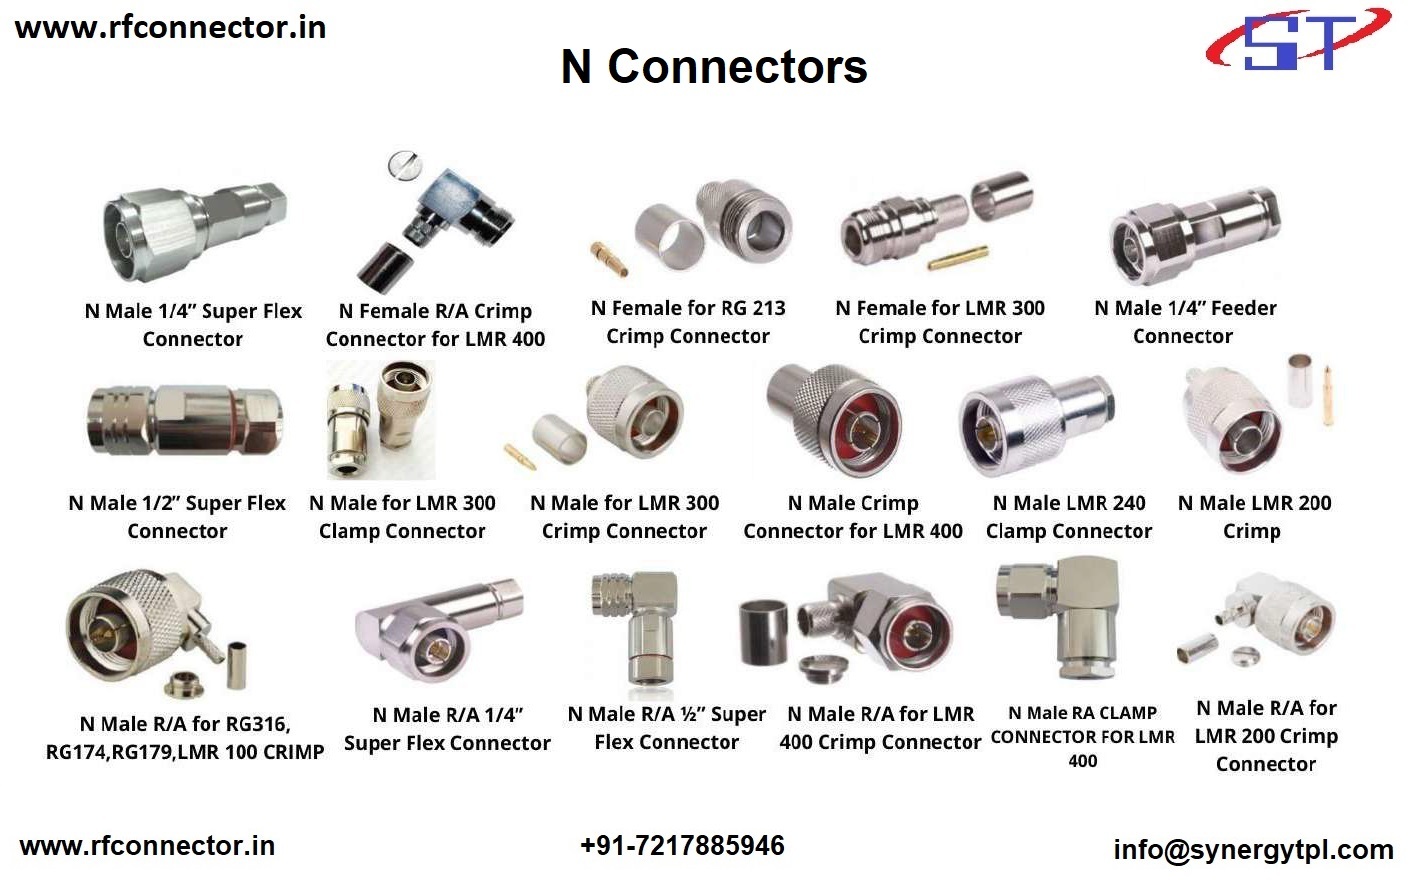 N Female Crimp Connector for LMR 200 cable